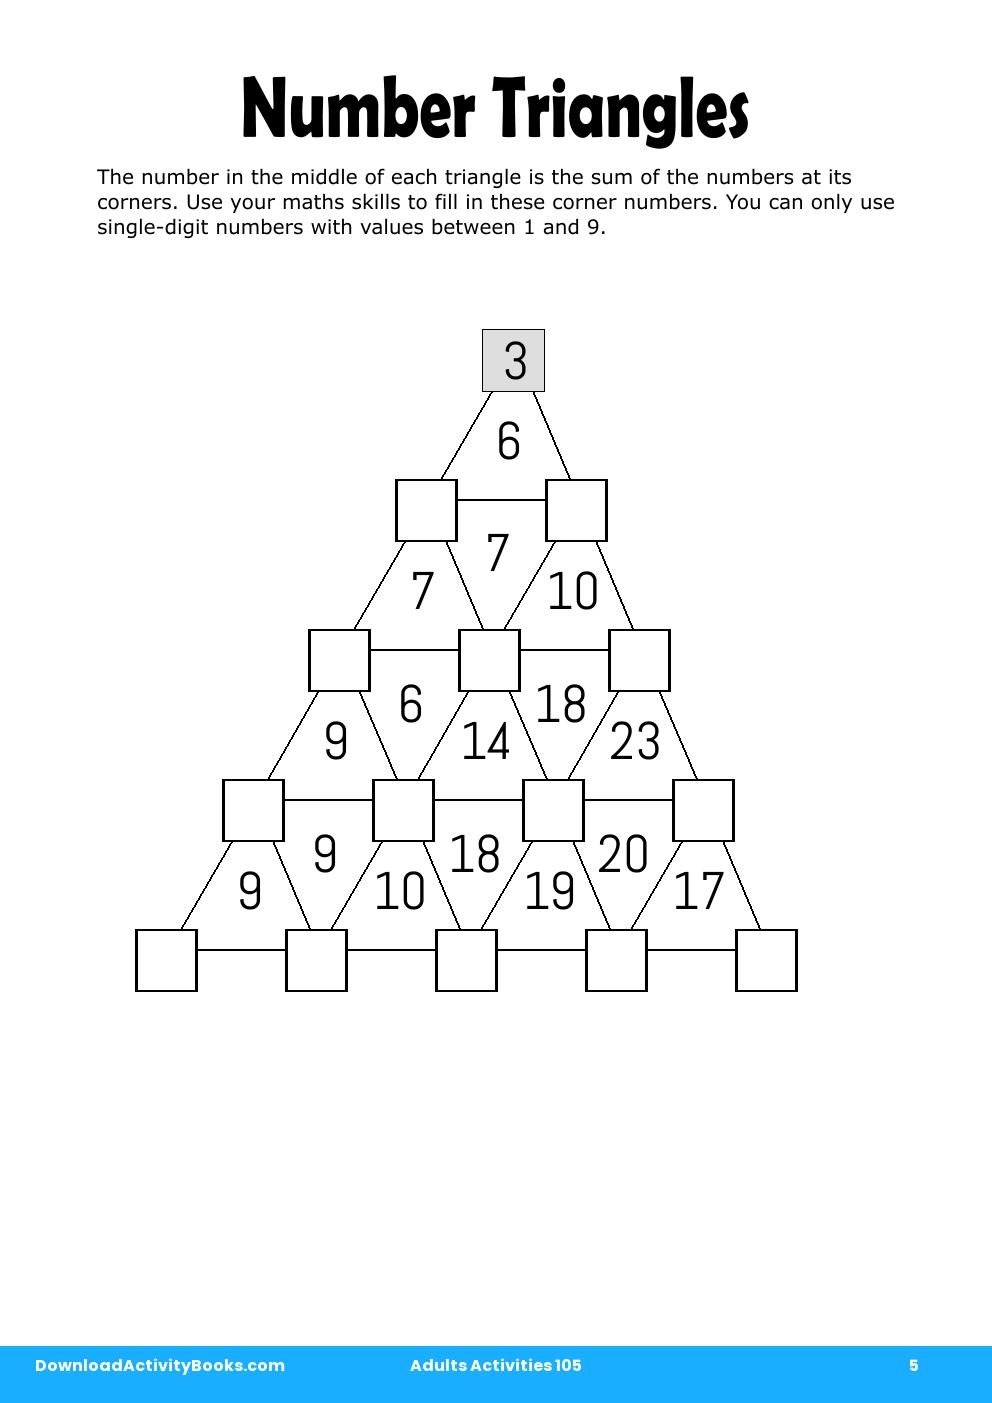 Number Triangles in Adults Activities 105